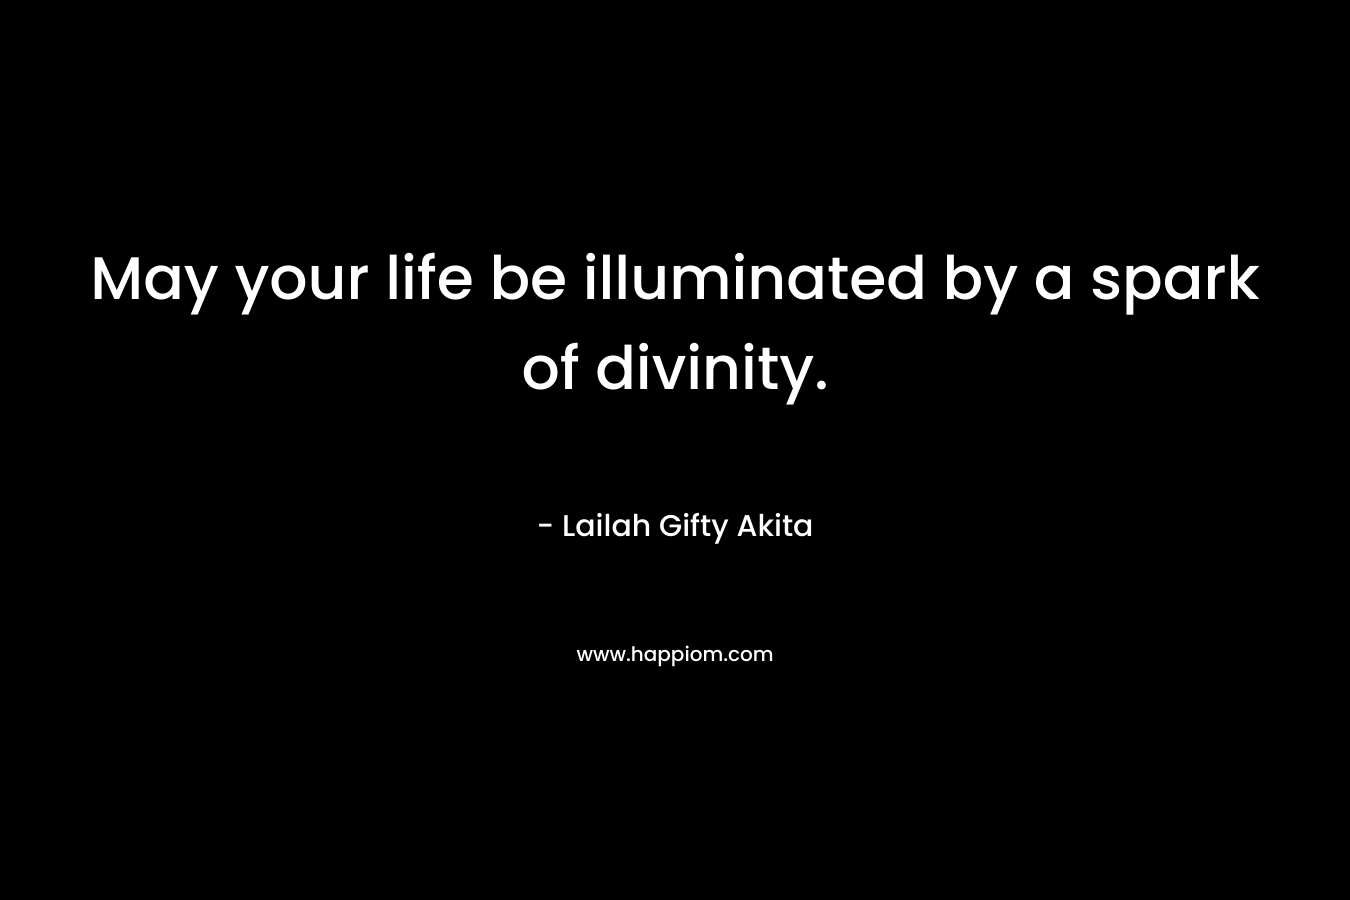 May your life be illuminated by a spark of divinity. – Lailah Gifty Akita